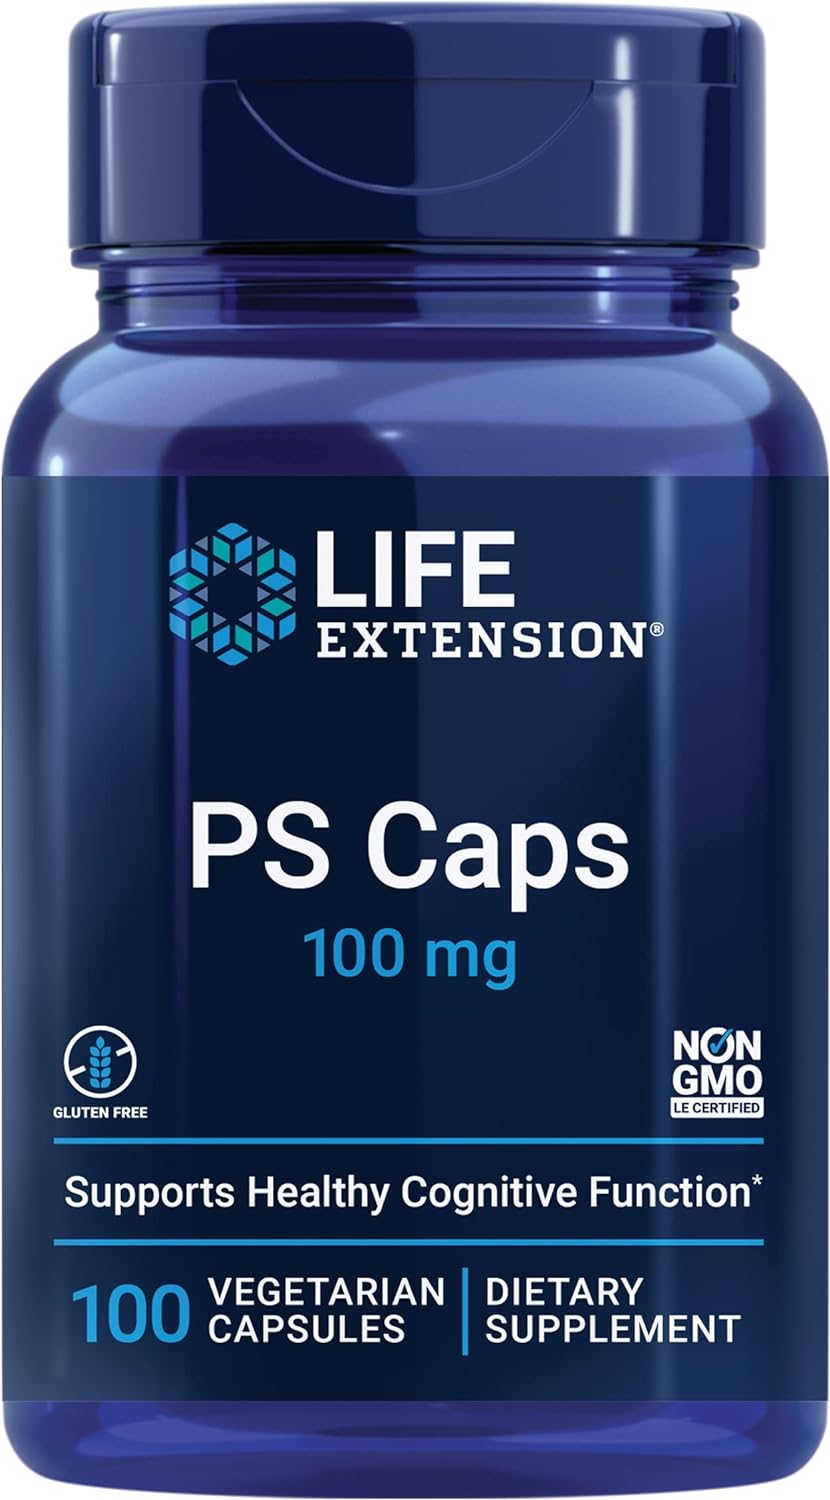 Life Extension PS Caps 100mg - Phosphatidylserine Supplement for Brain health - Healthy Cognitive Fu